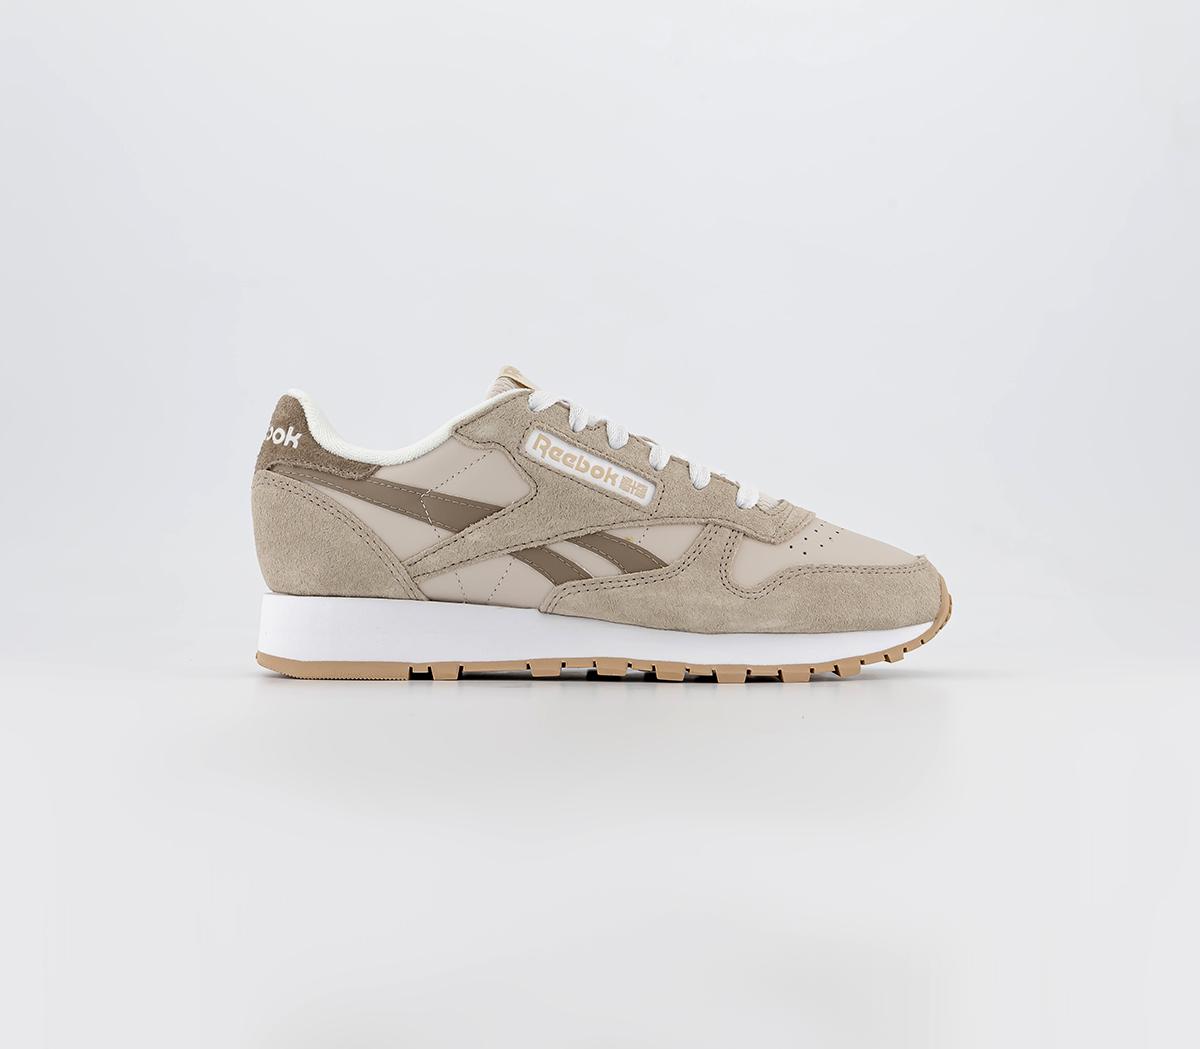 ReebokCl Leather Trainers Sahara Alabster